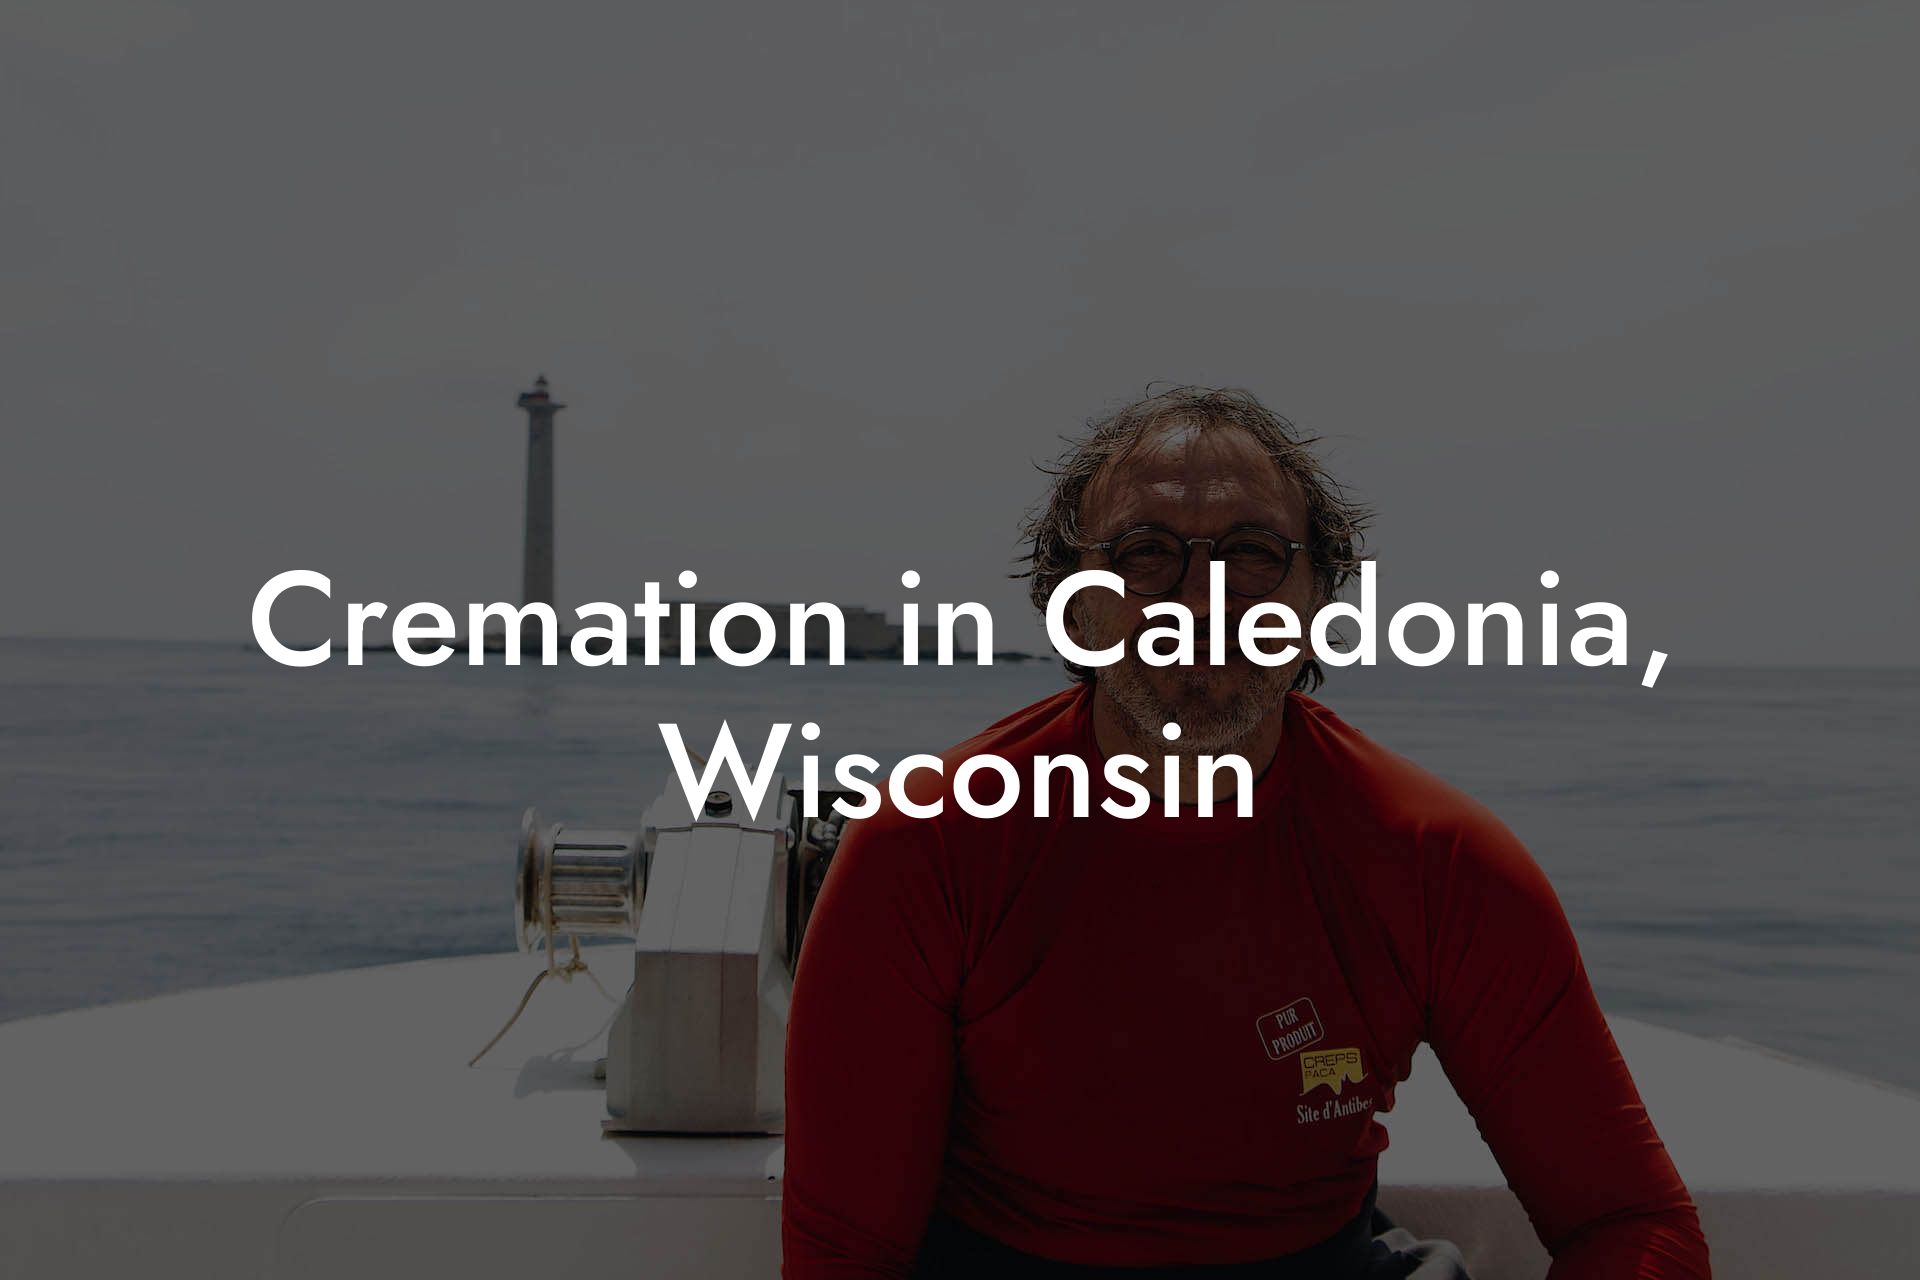 Cremation in Caledonia, Wisconsin